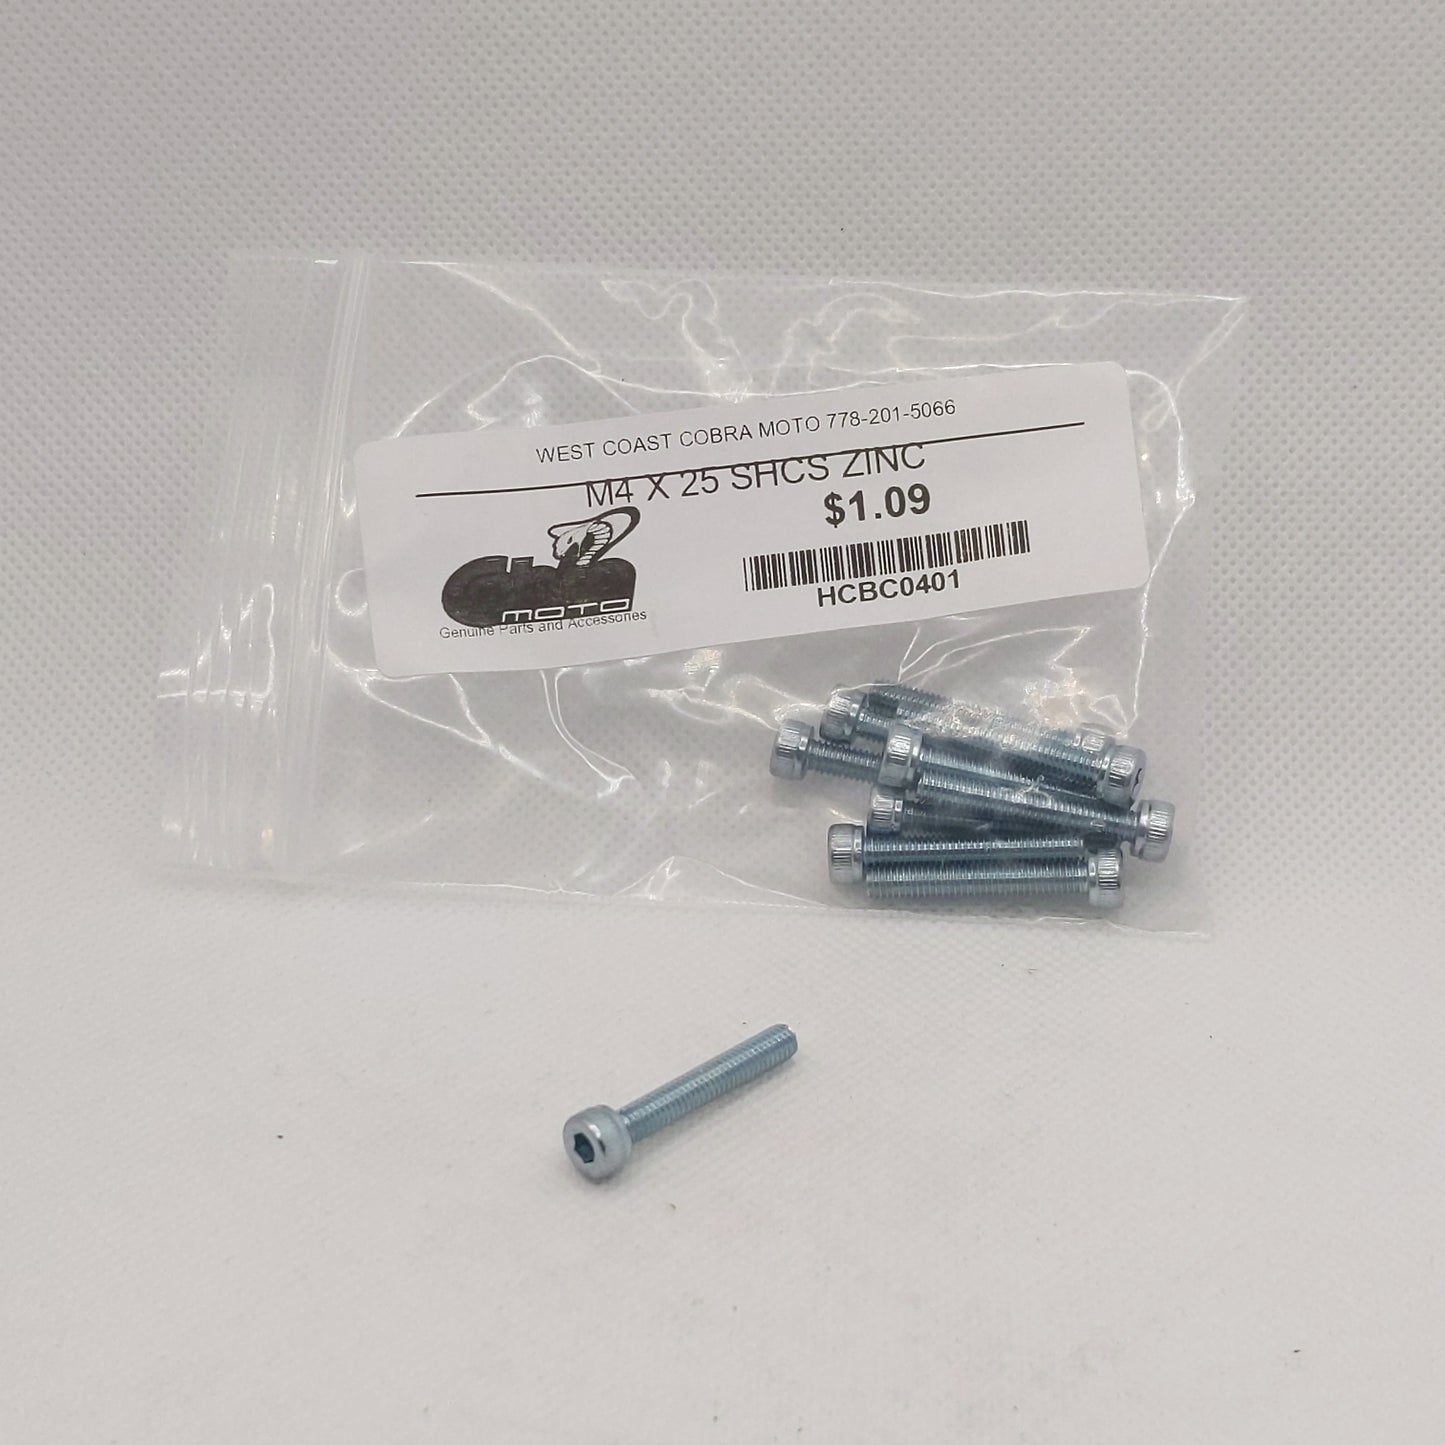 HCBC0401 Stator Cover Bolts M4 x25